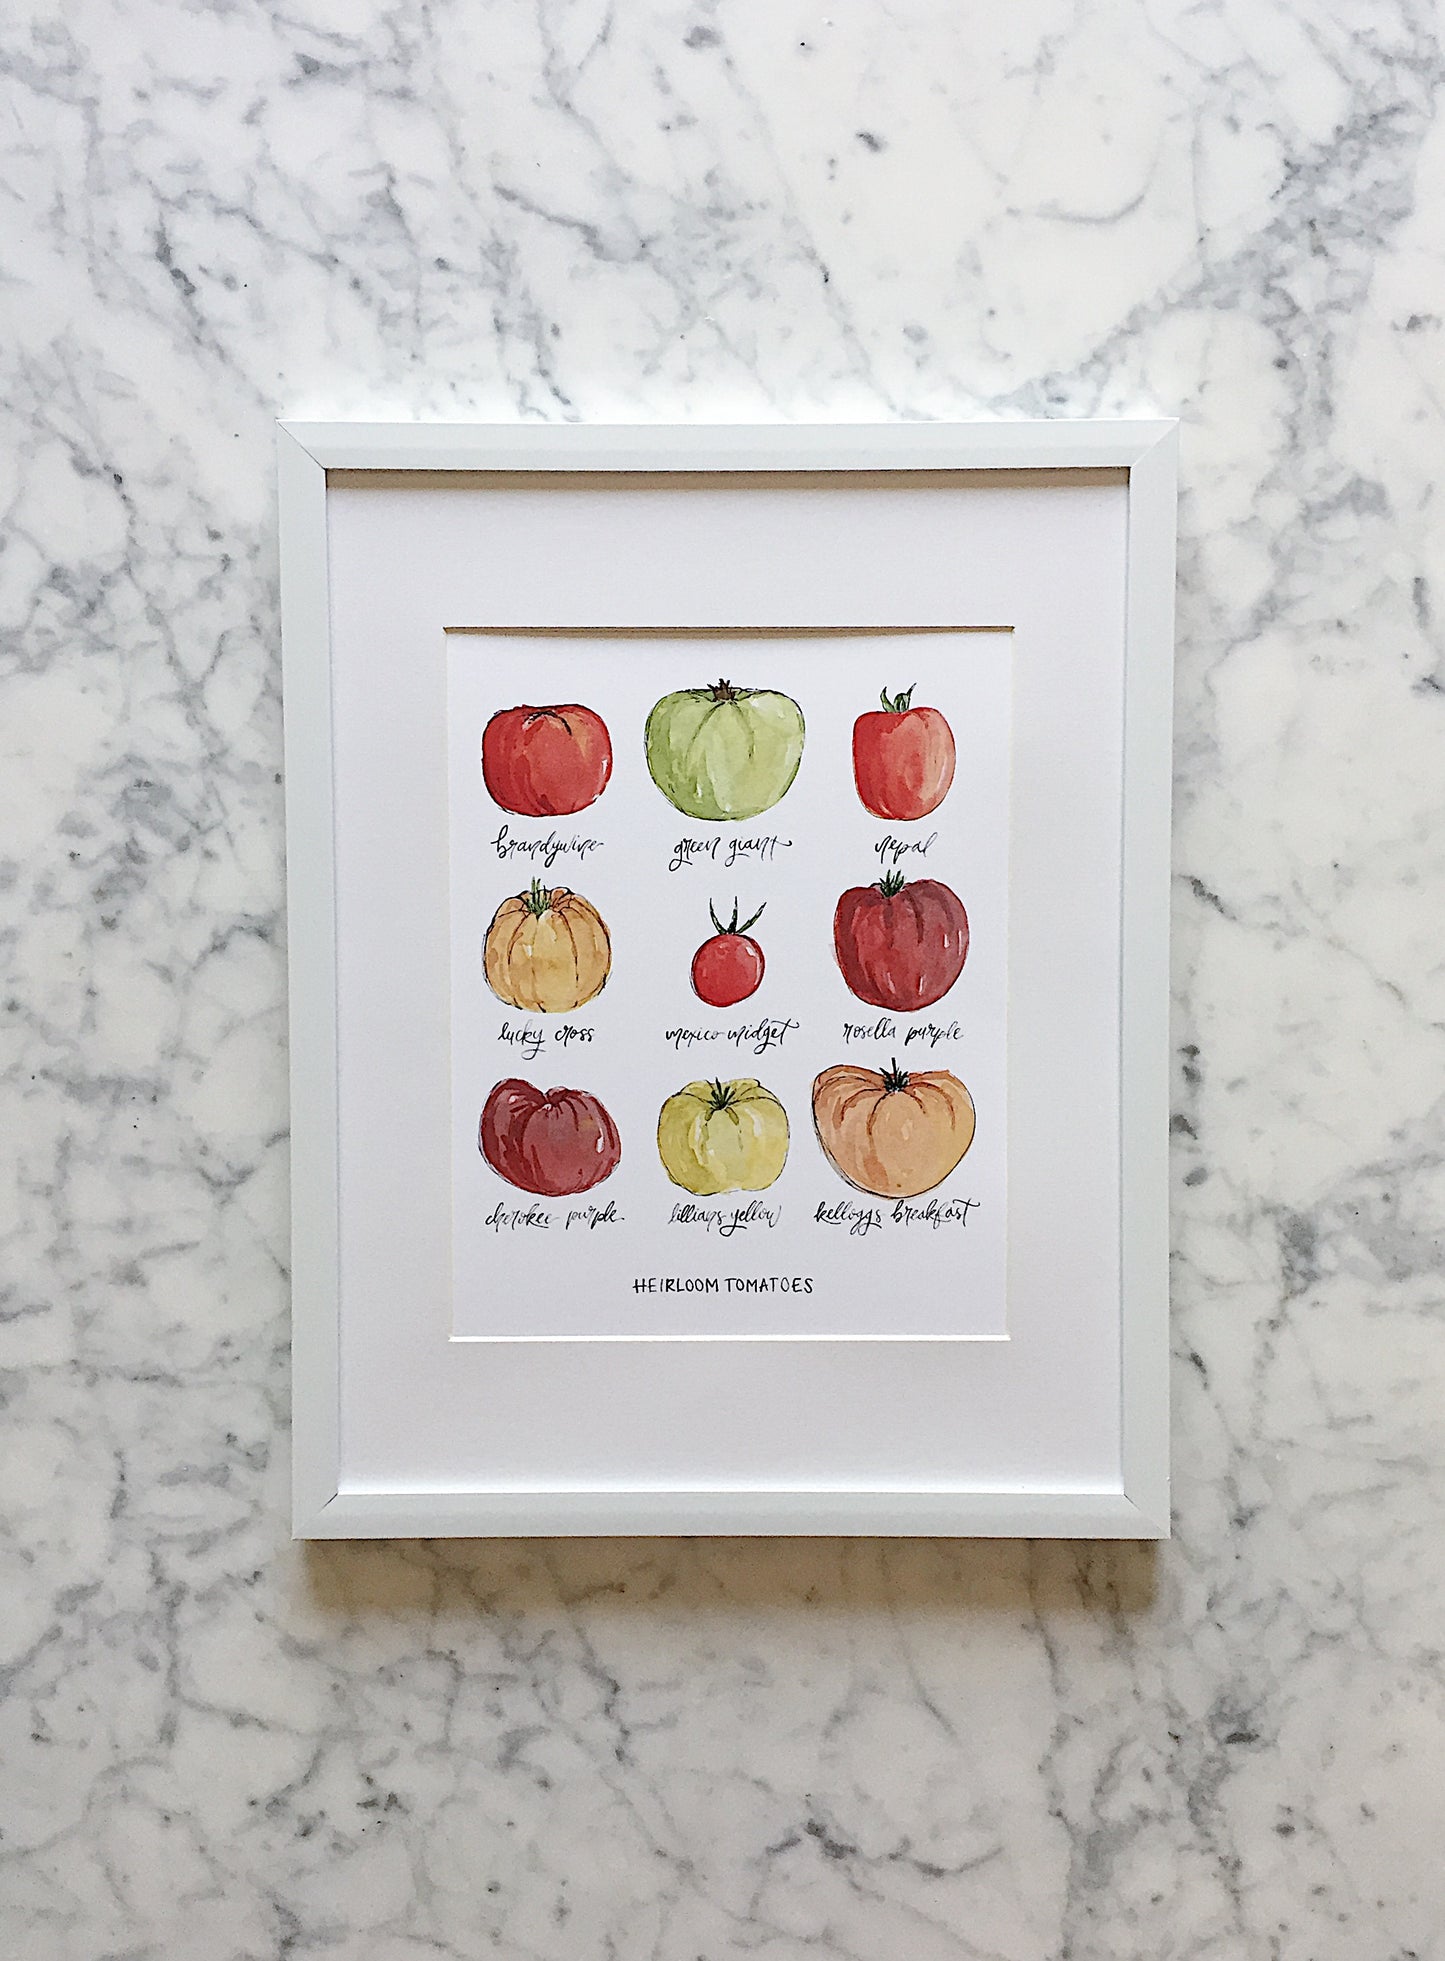 A fun watercolor print of heirloom tomatoes colorfully displayed with a white background - brandywise, green giant, nepal, lucky cross, mexico midget, rosella purple, cherokee purple, lillian yellow, kelloggs breakfast